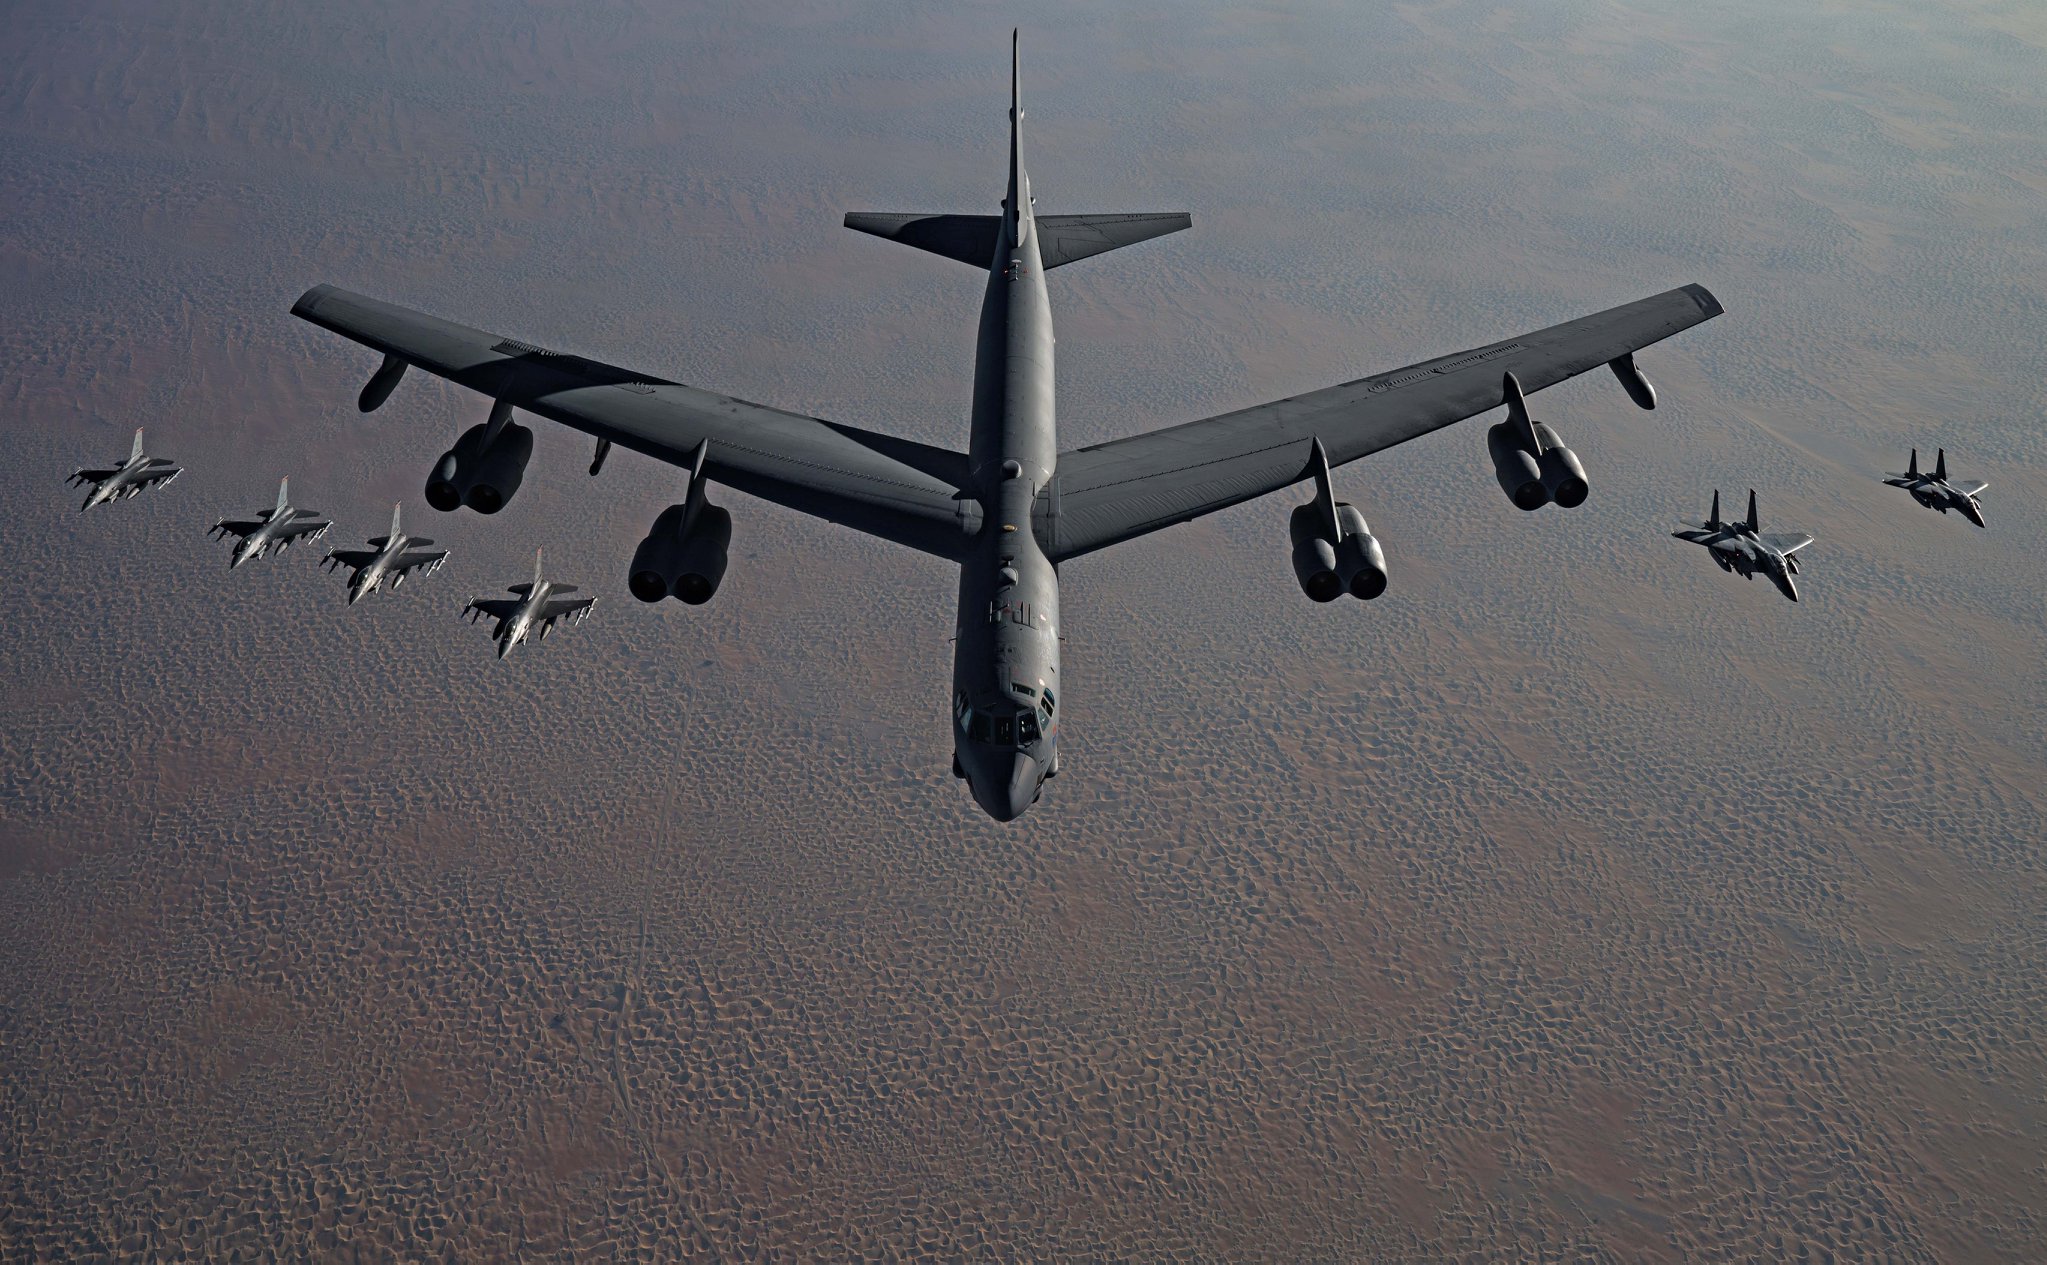 In threat to Iran, US sends heavy bombers to Middle East via Israel